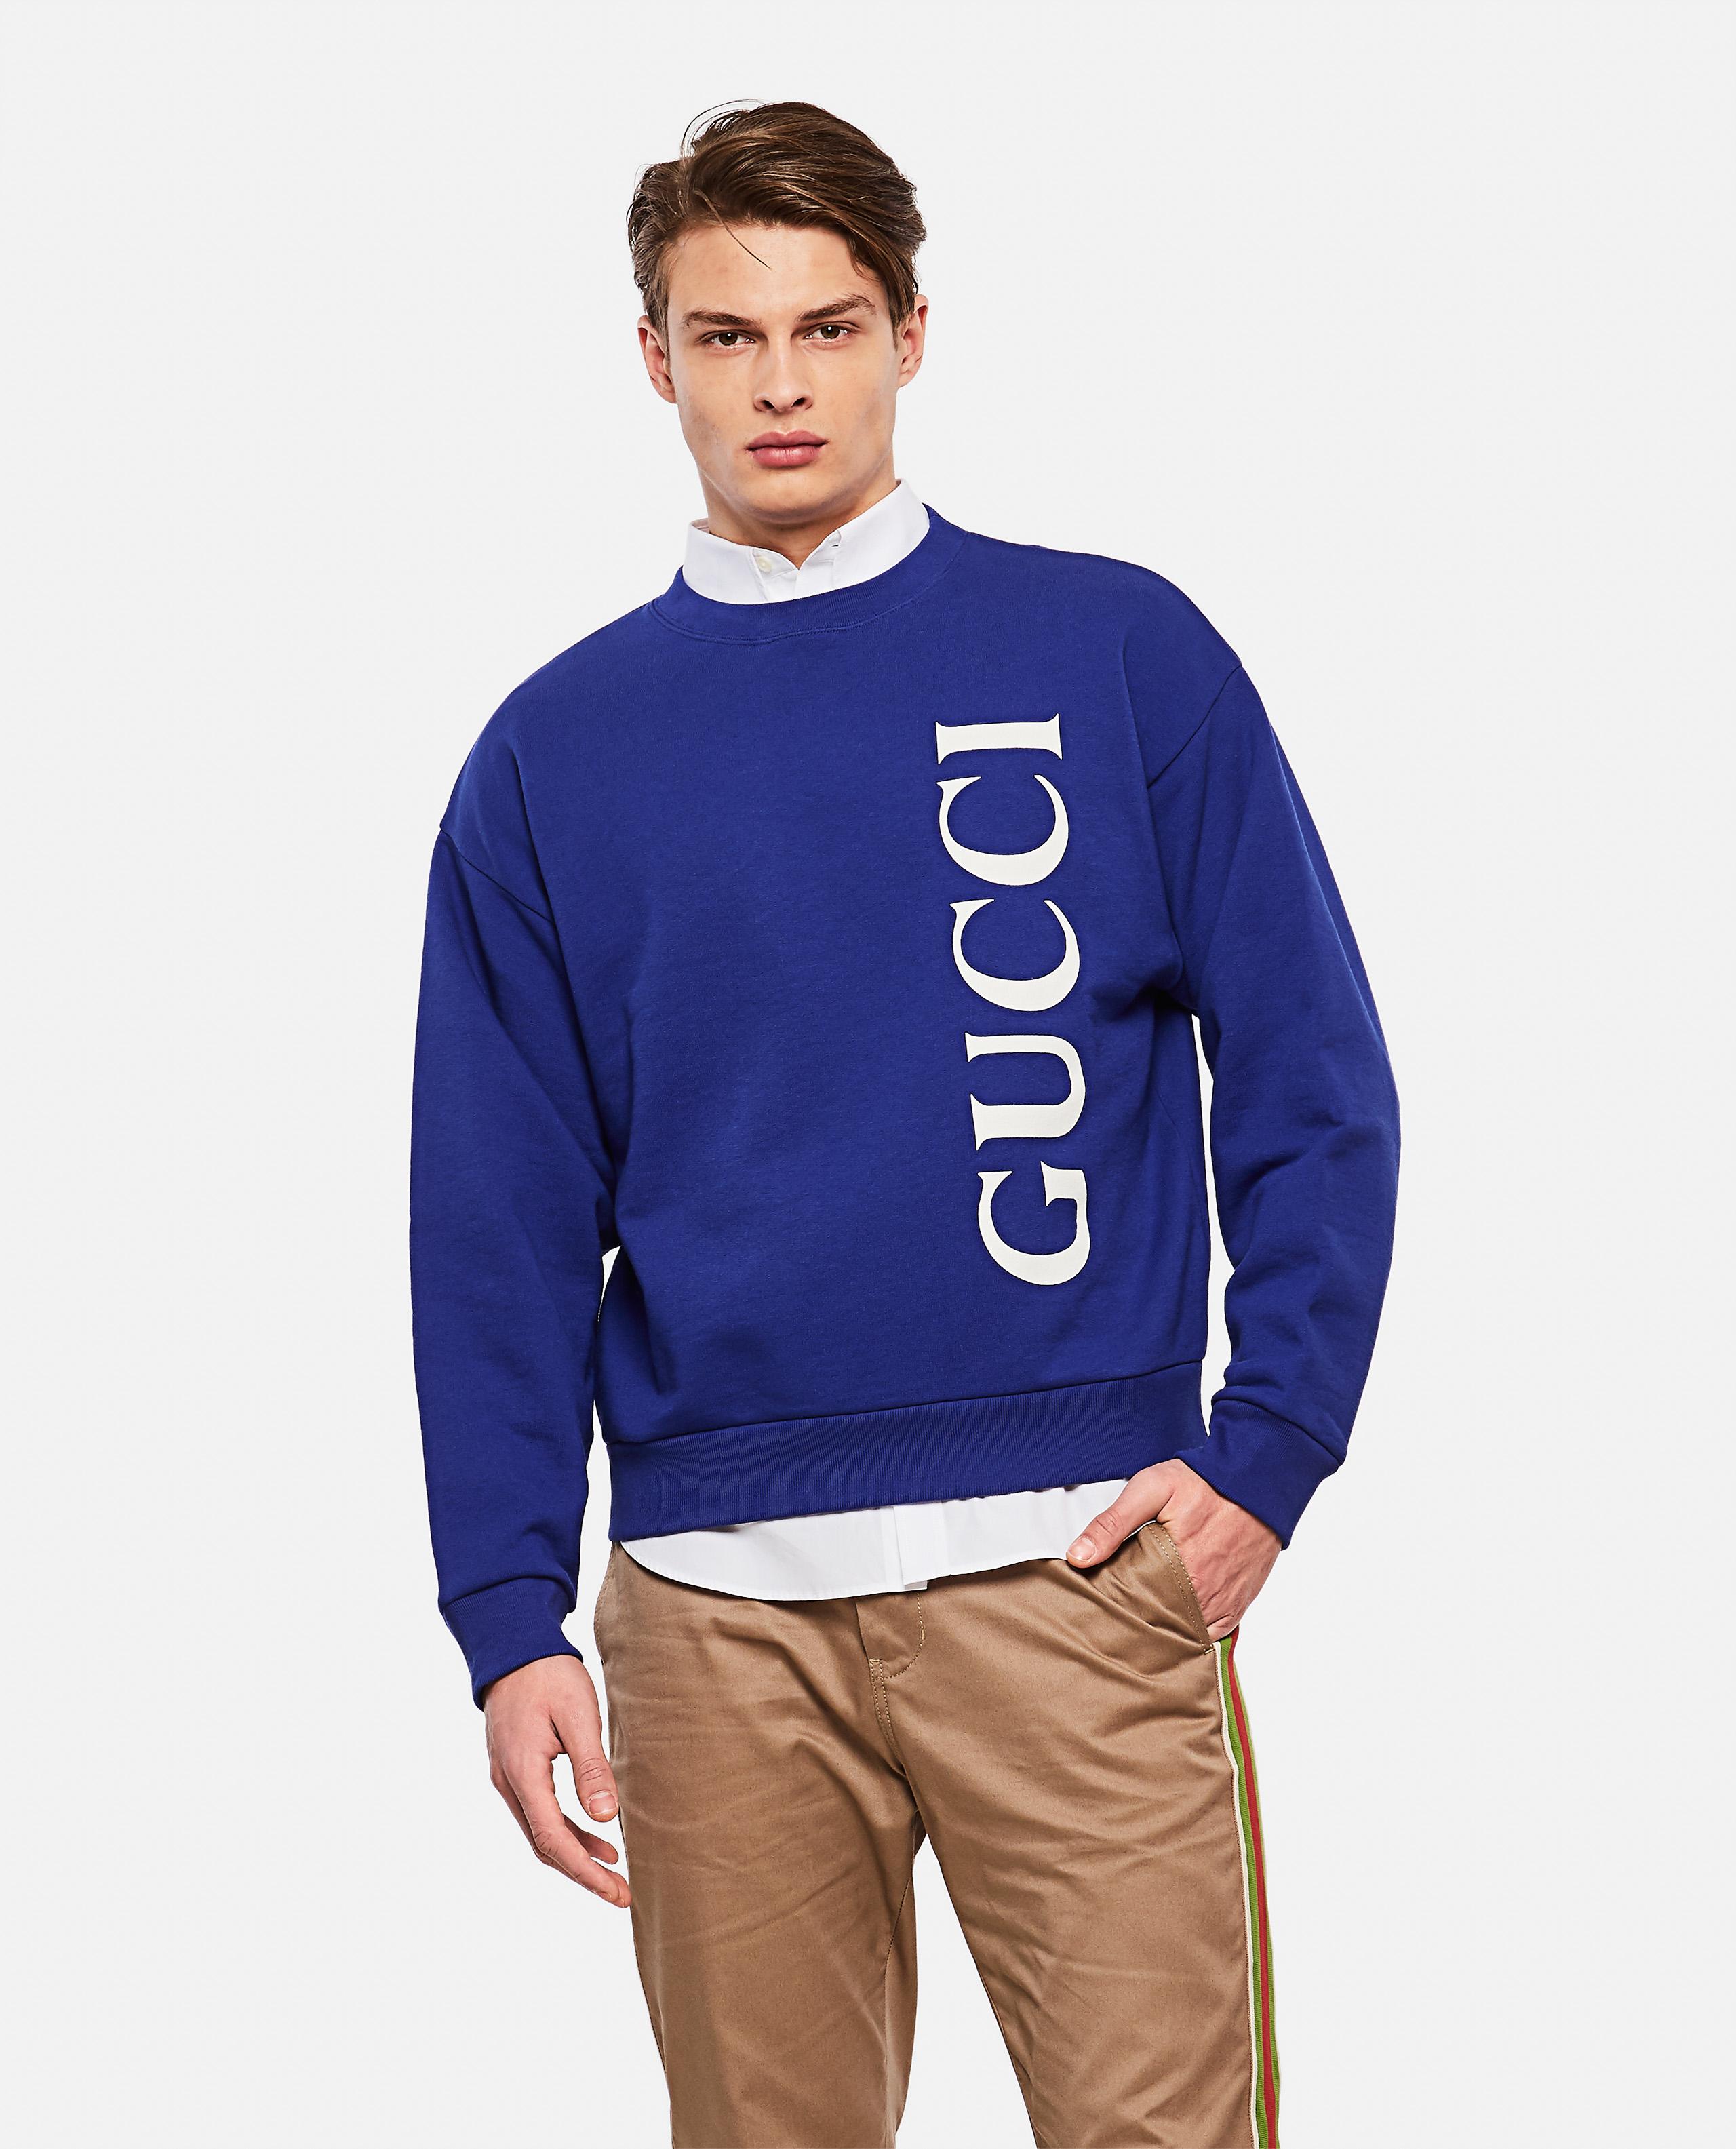 Gucci Sweatshirt With Print in Blue for Men - Lyst